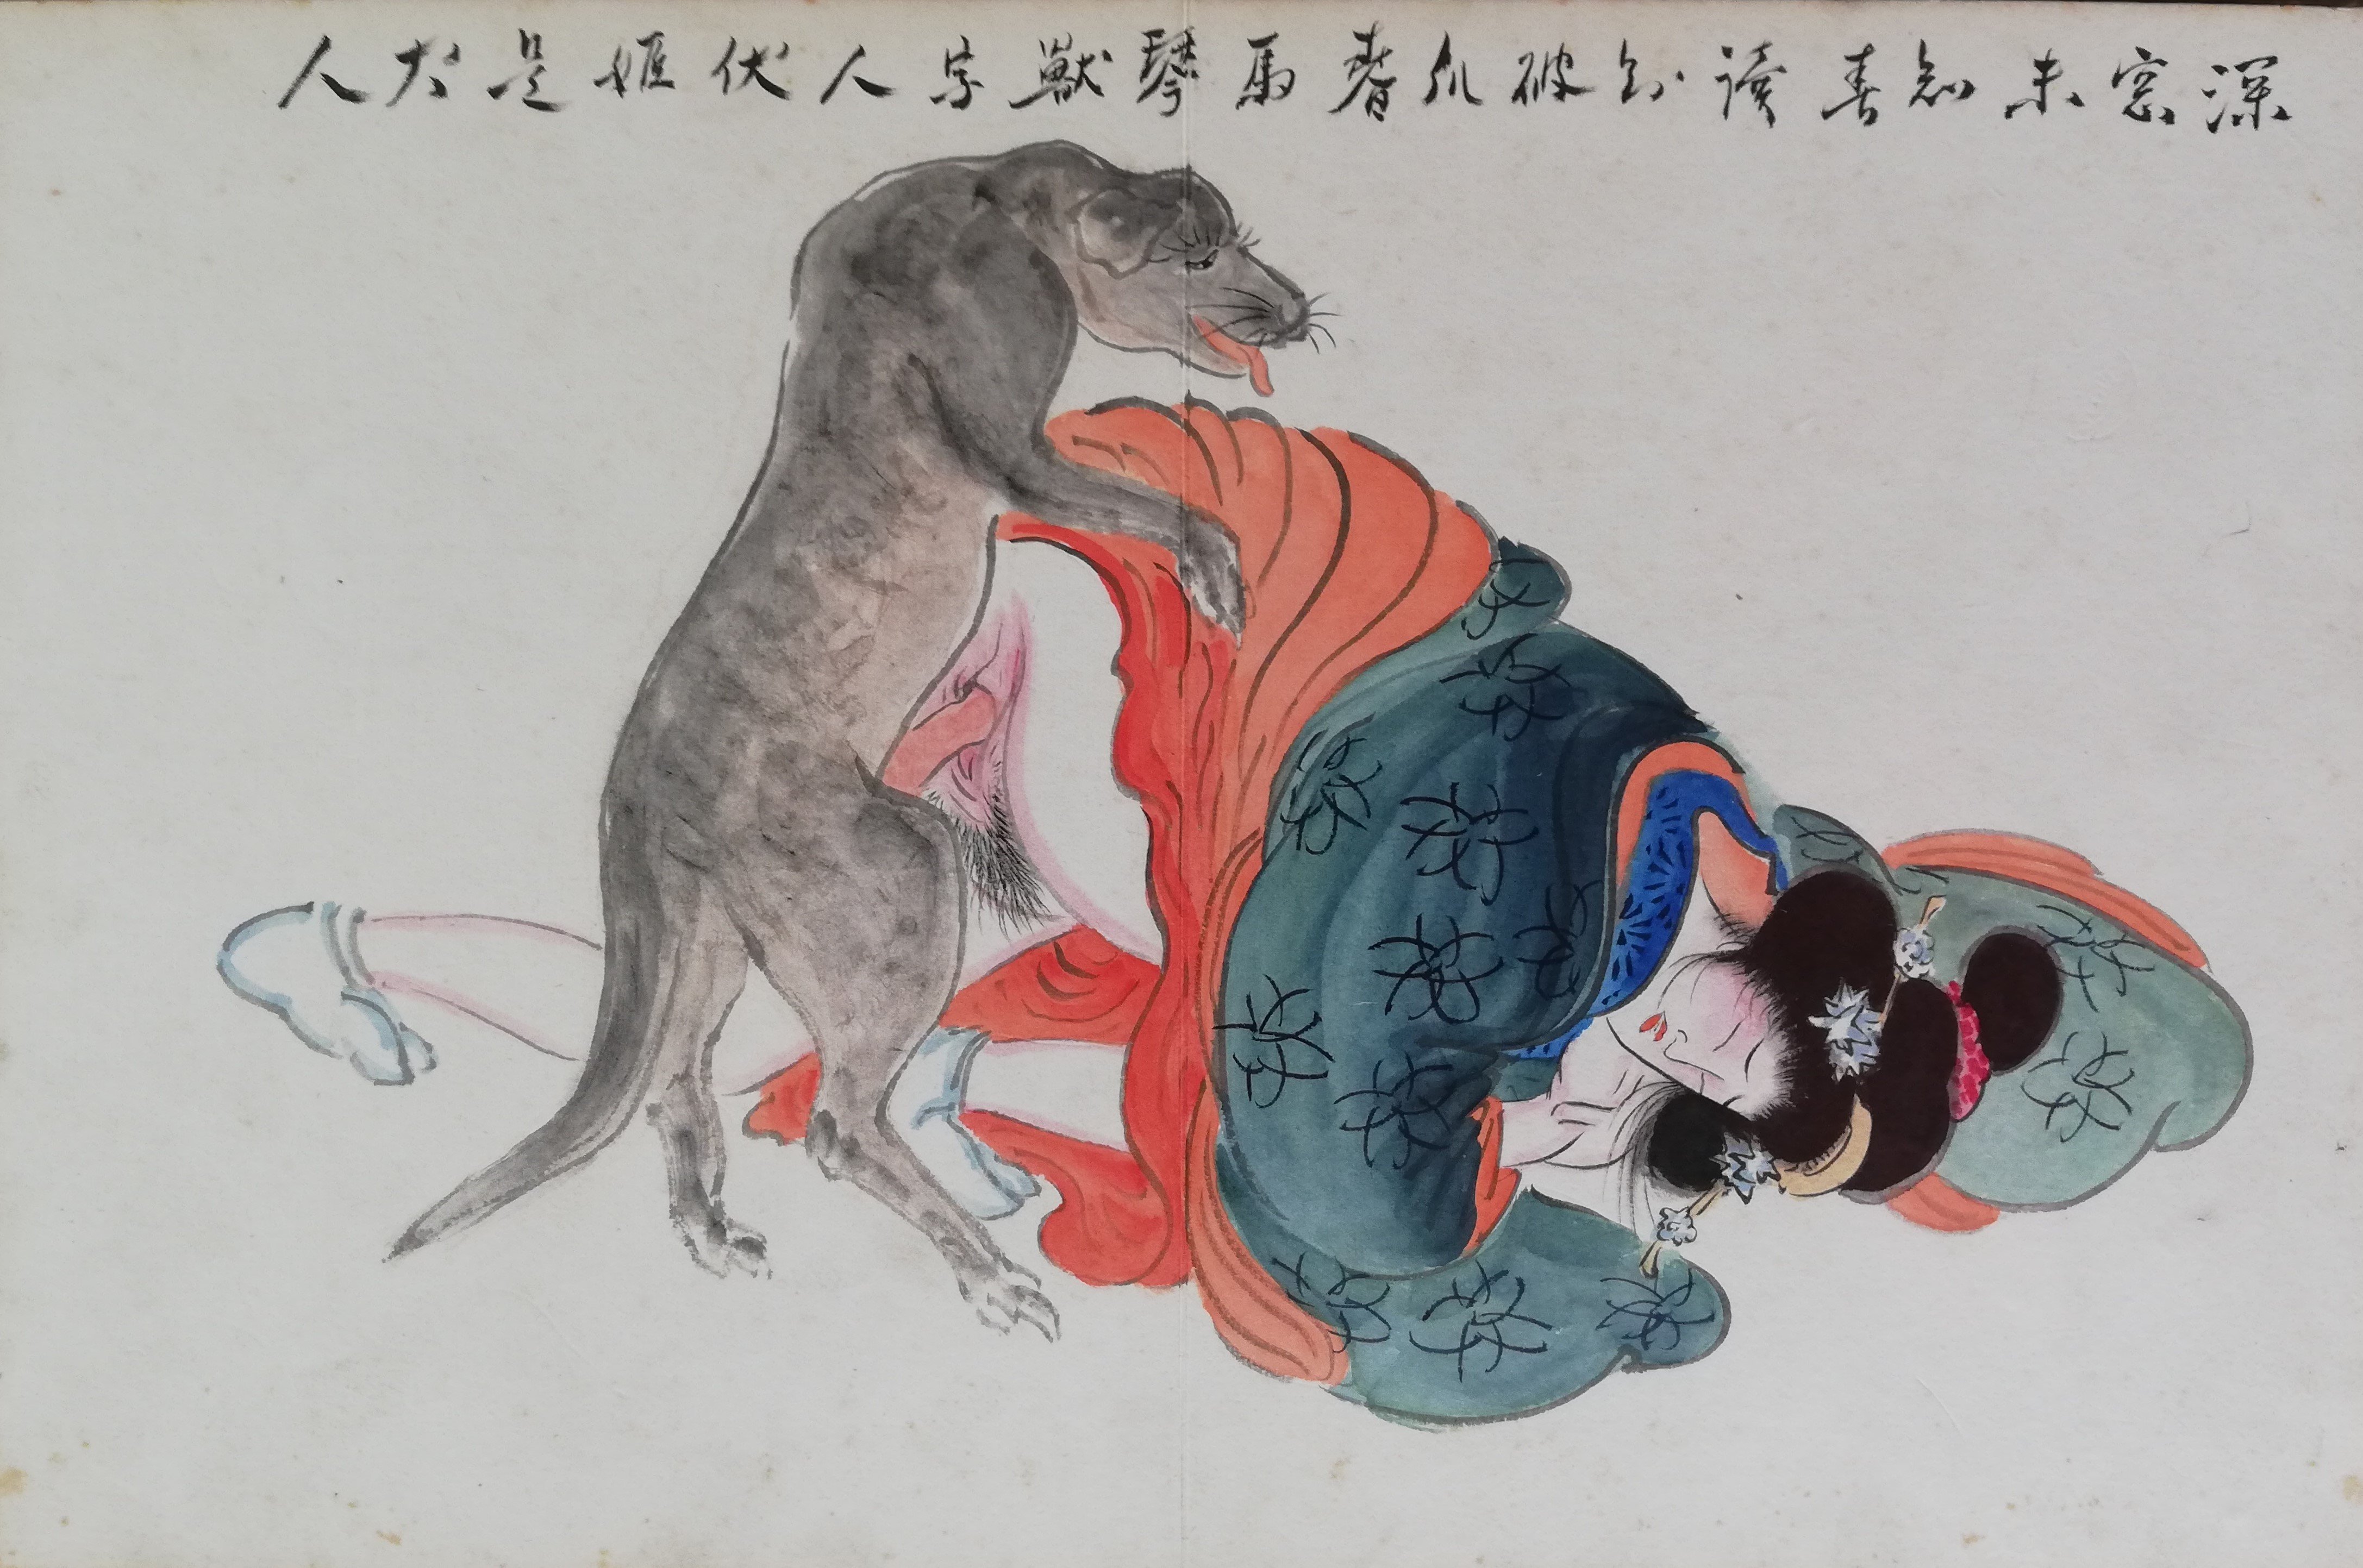 performing cunnilingus: doggy-style after Kunisada's Yatsufusa making love to a dog